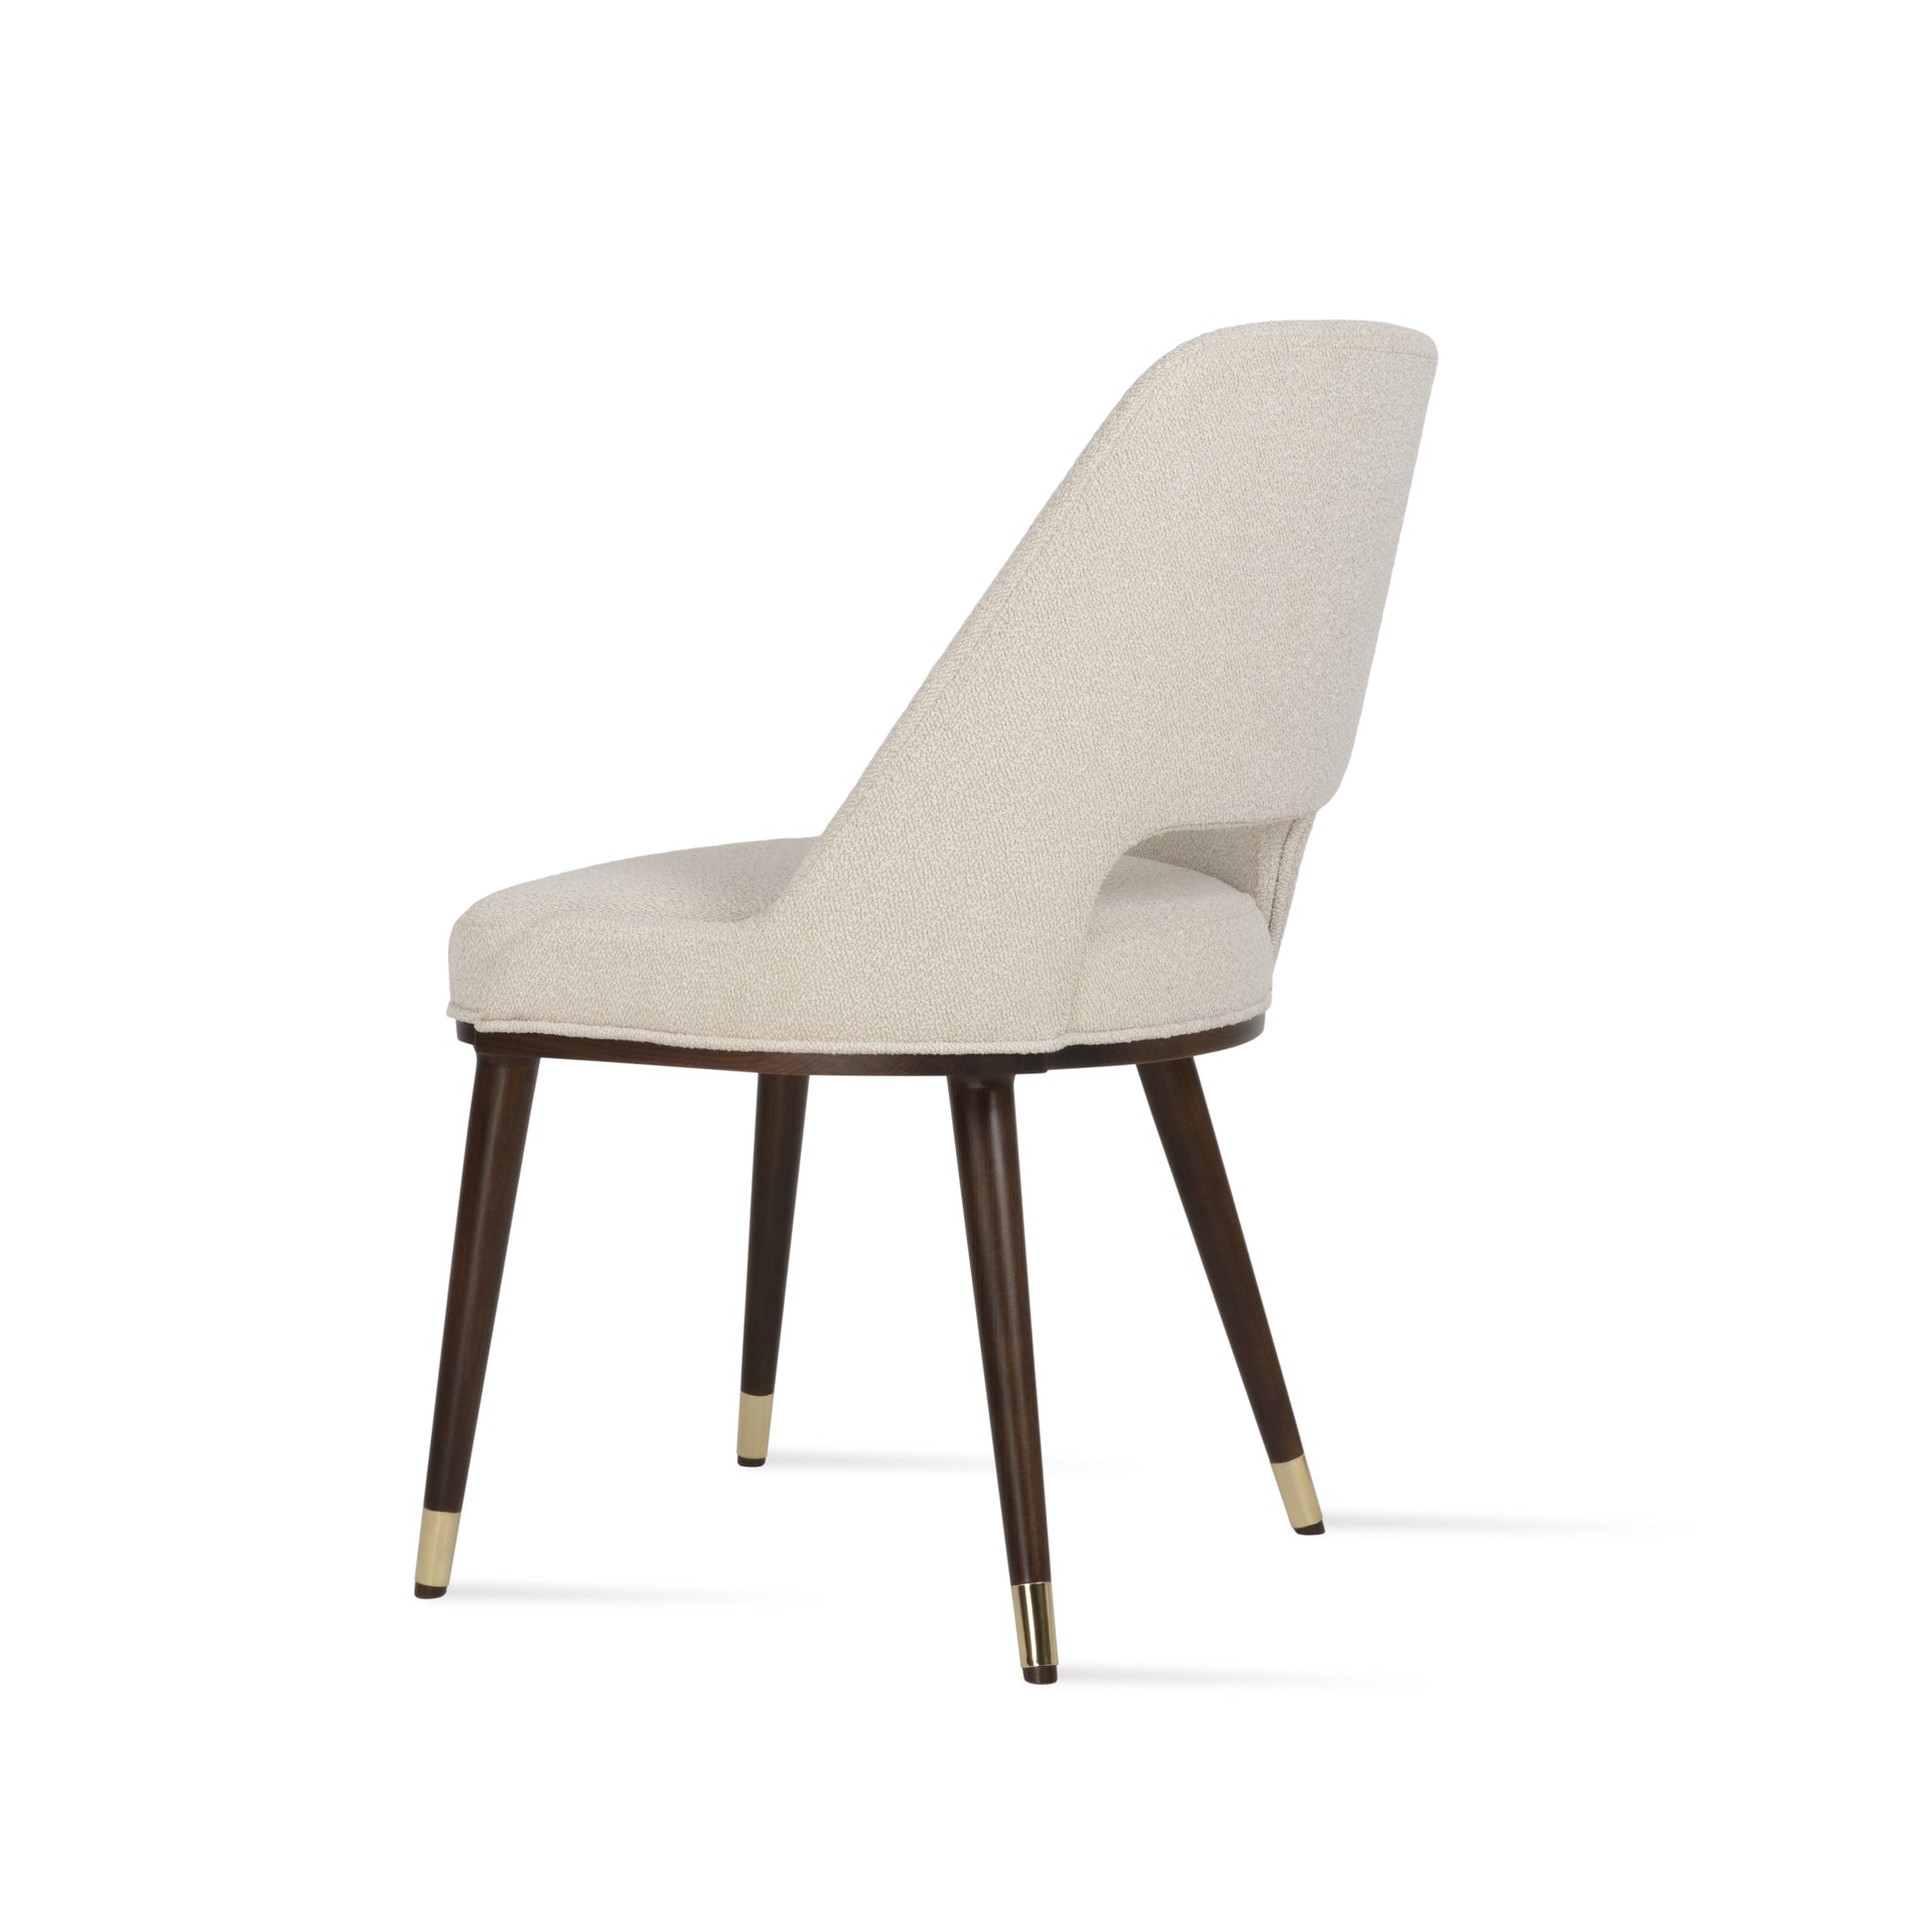 Elegant Marash Wood Chair - Residential and Commercial Use